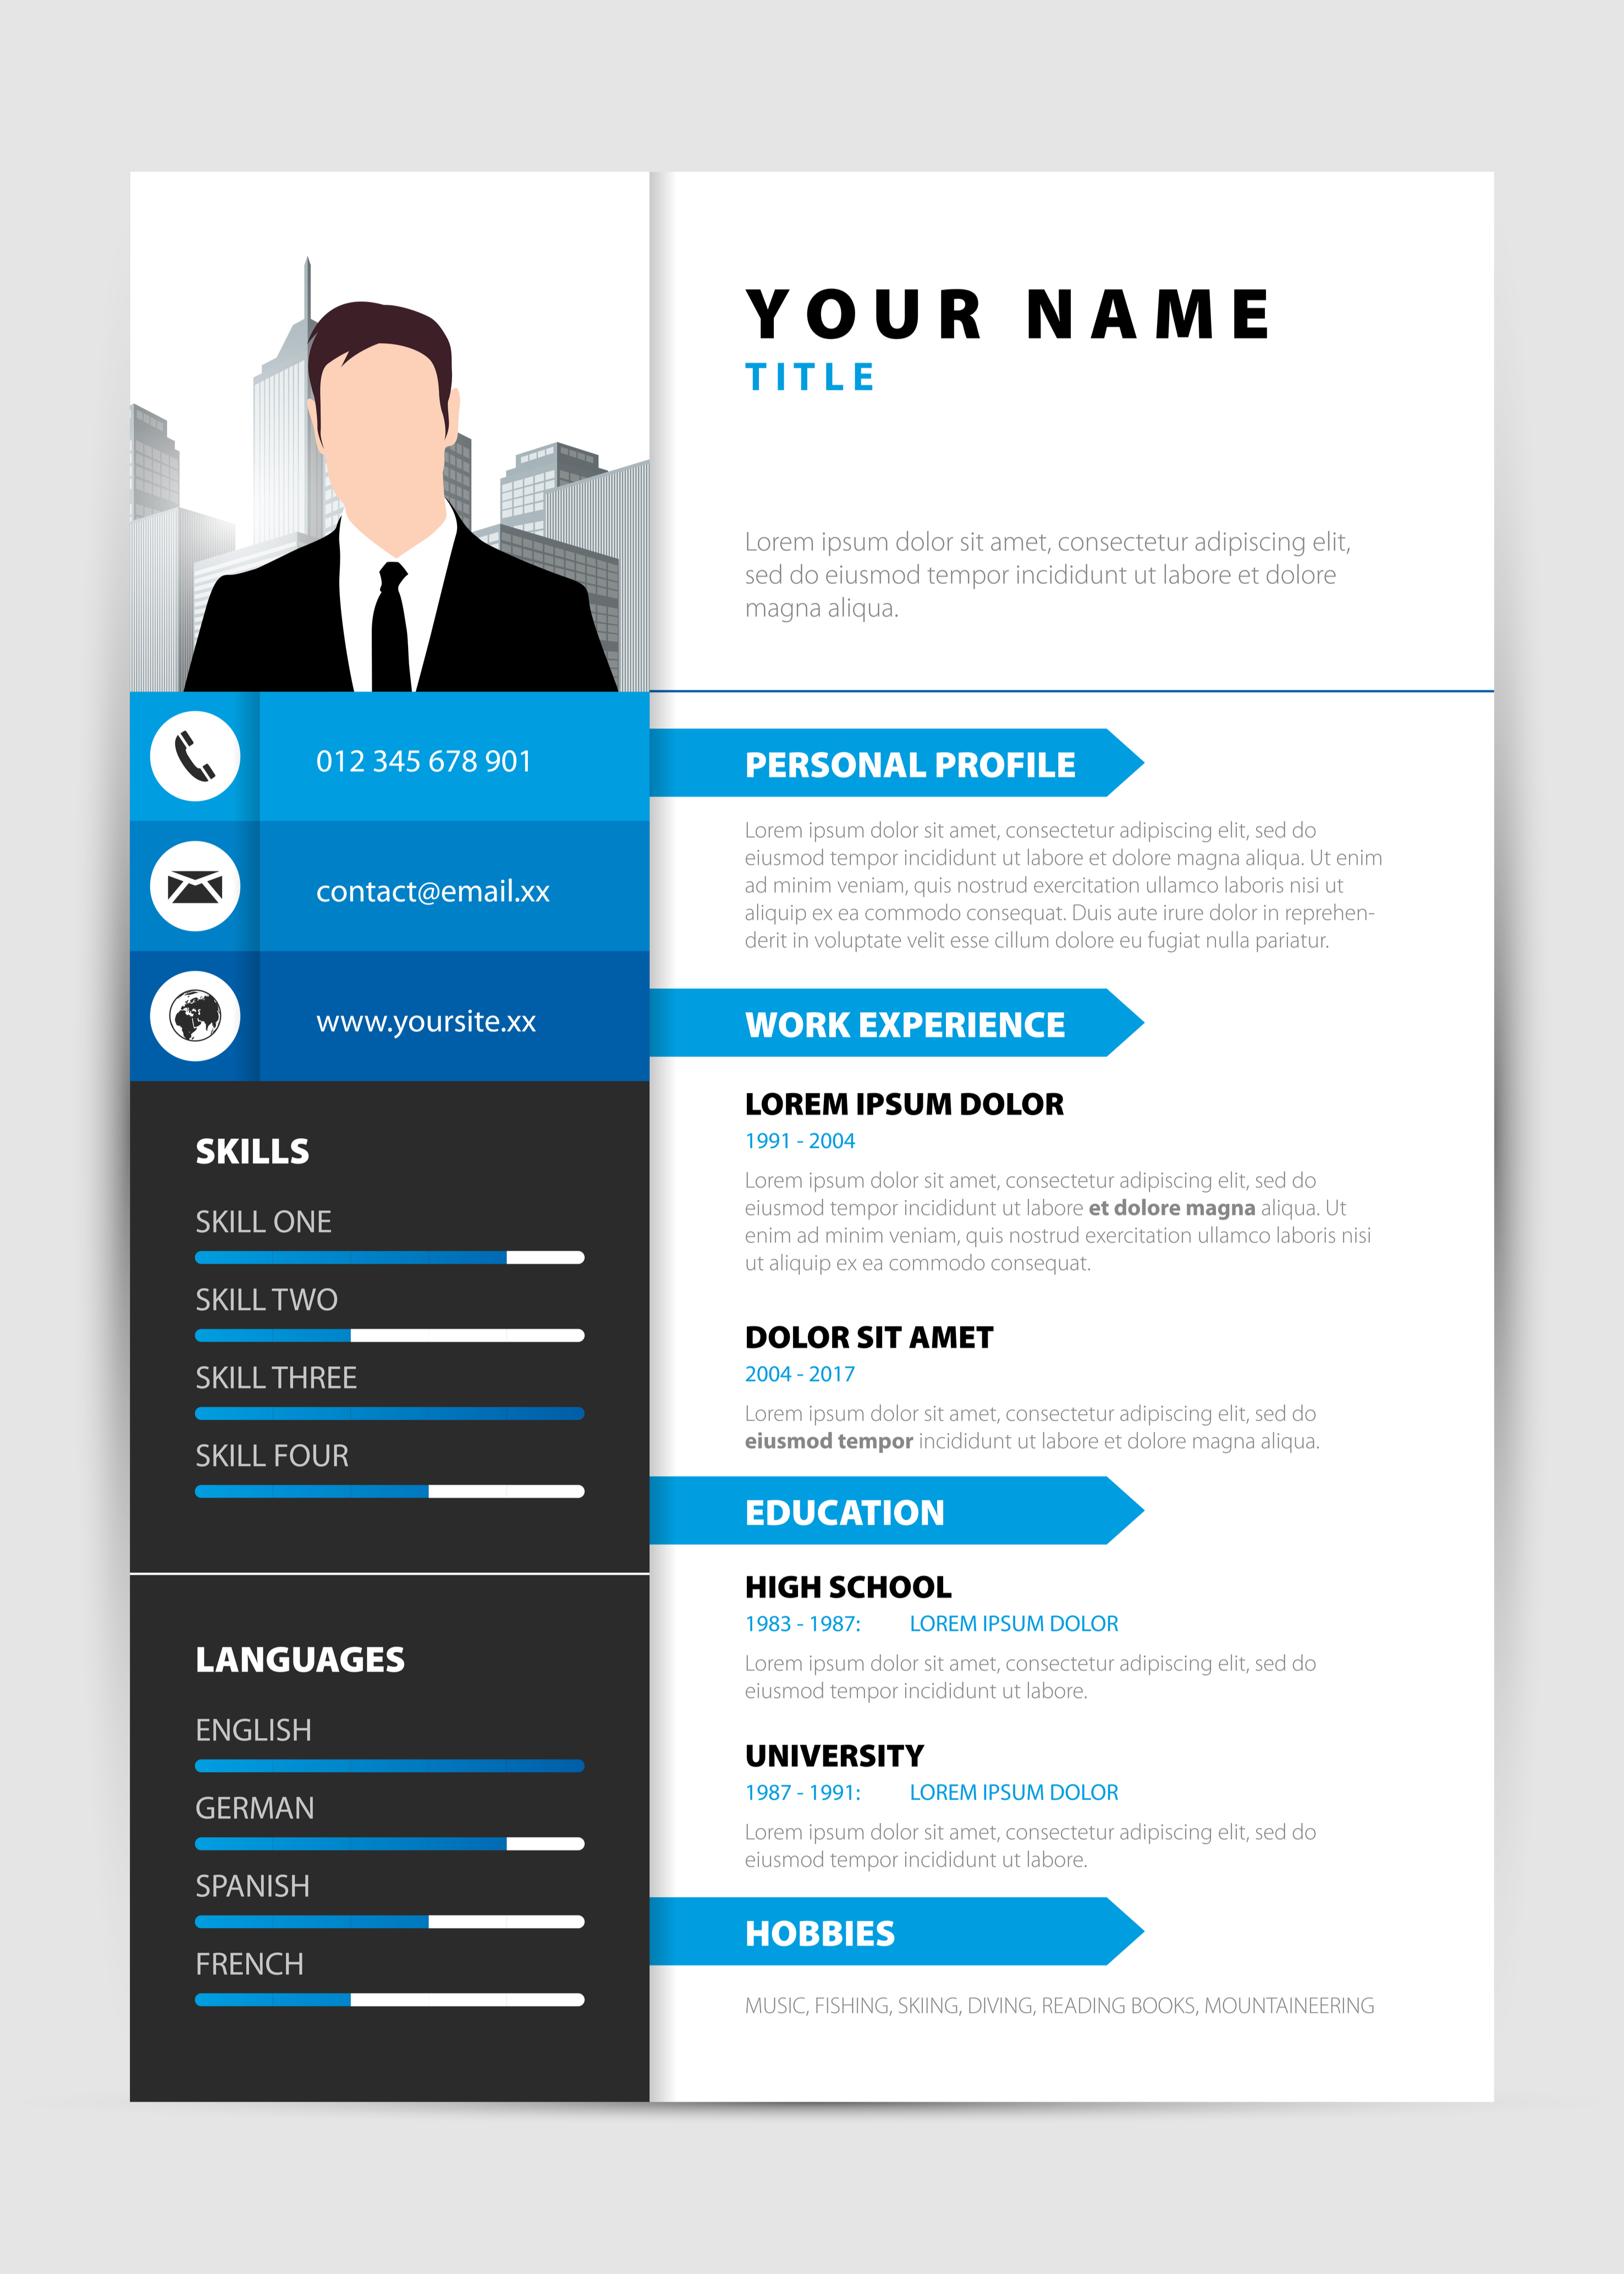 Organize Your Resume Layout